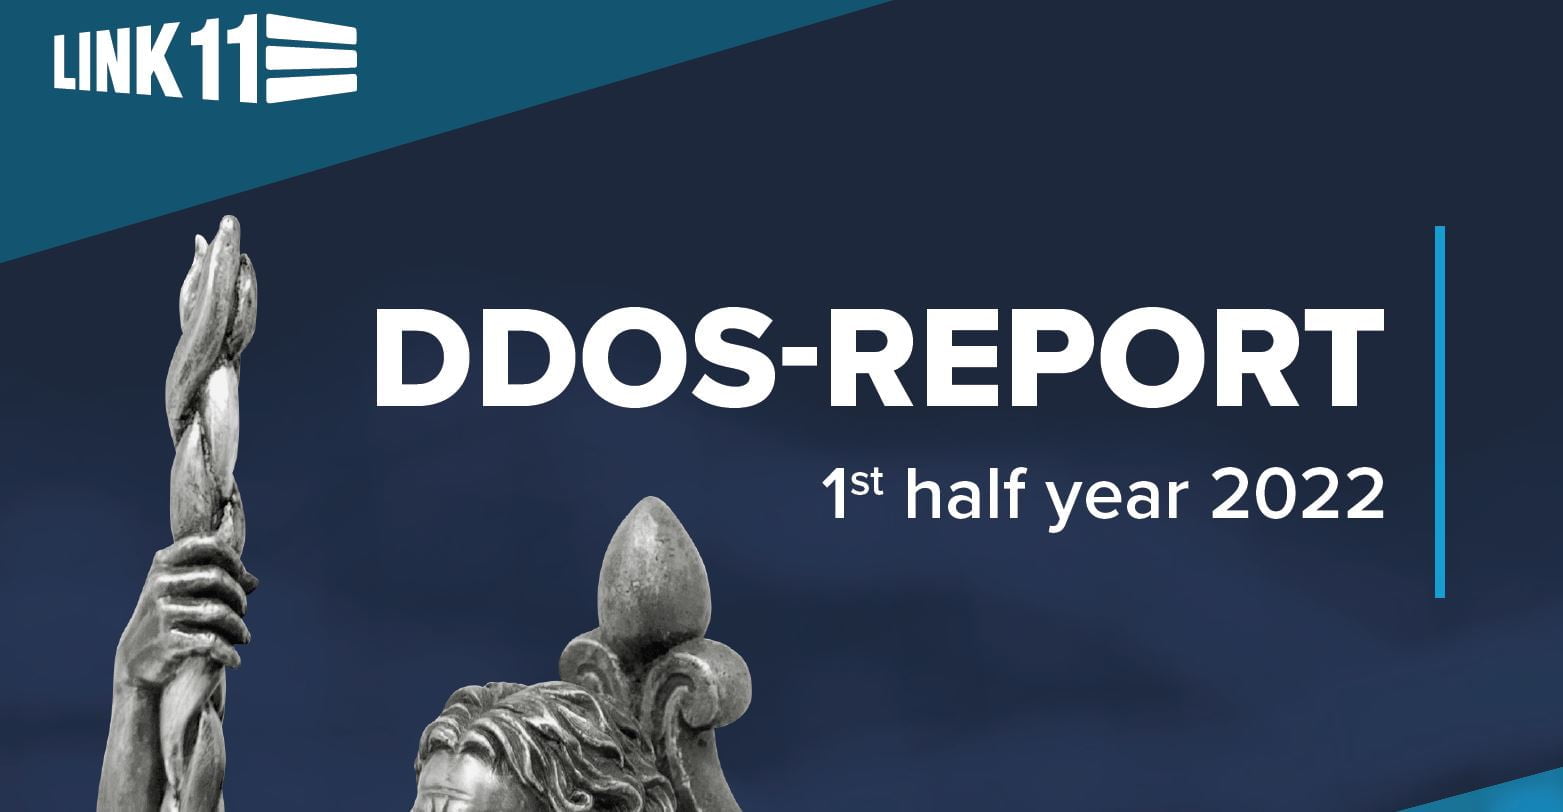 New DDoS-Report for 1st half-year of 2022